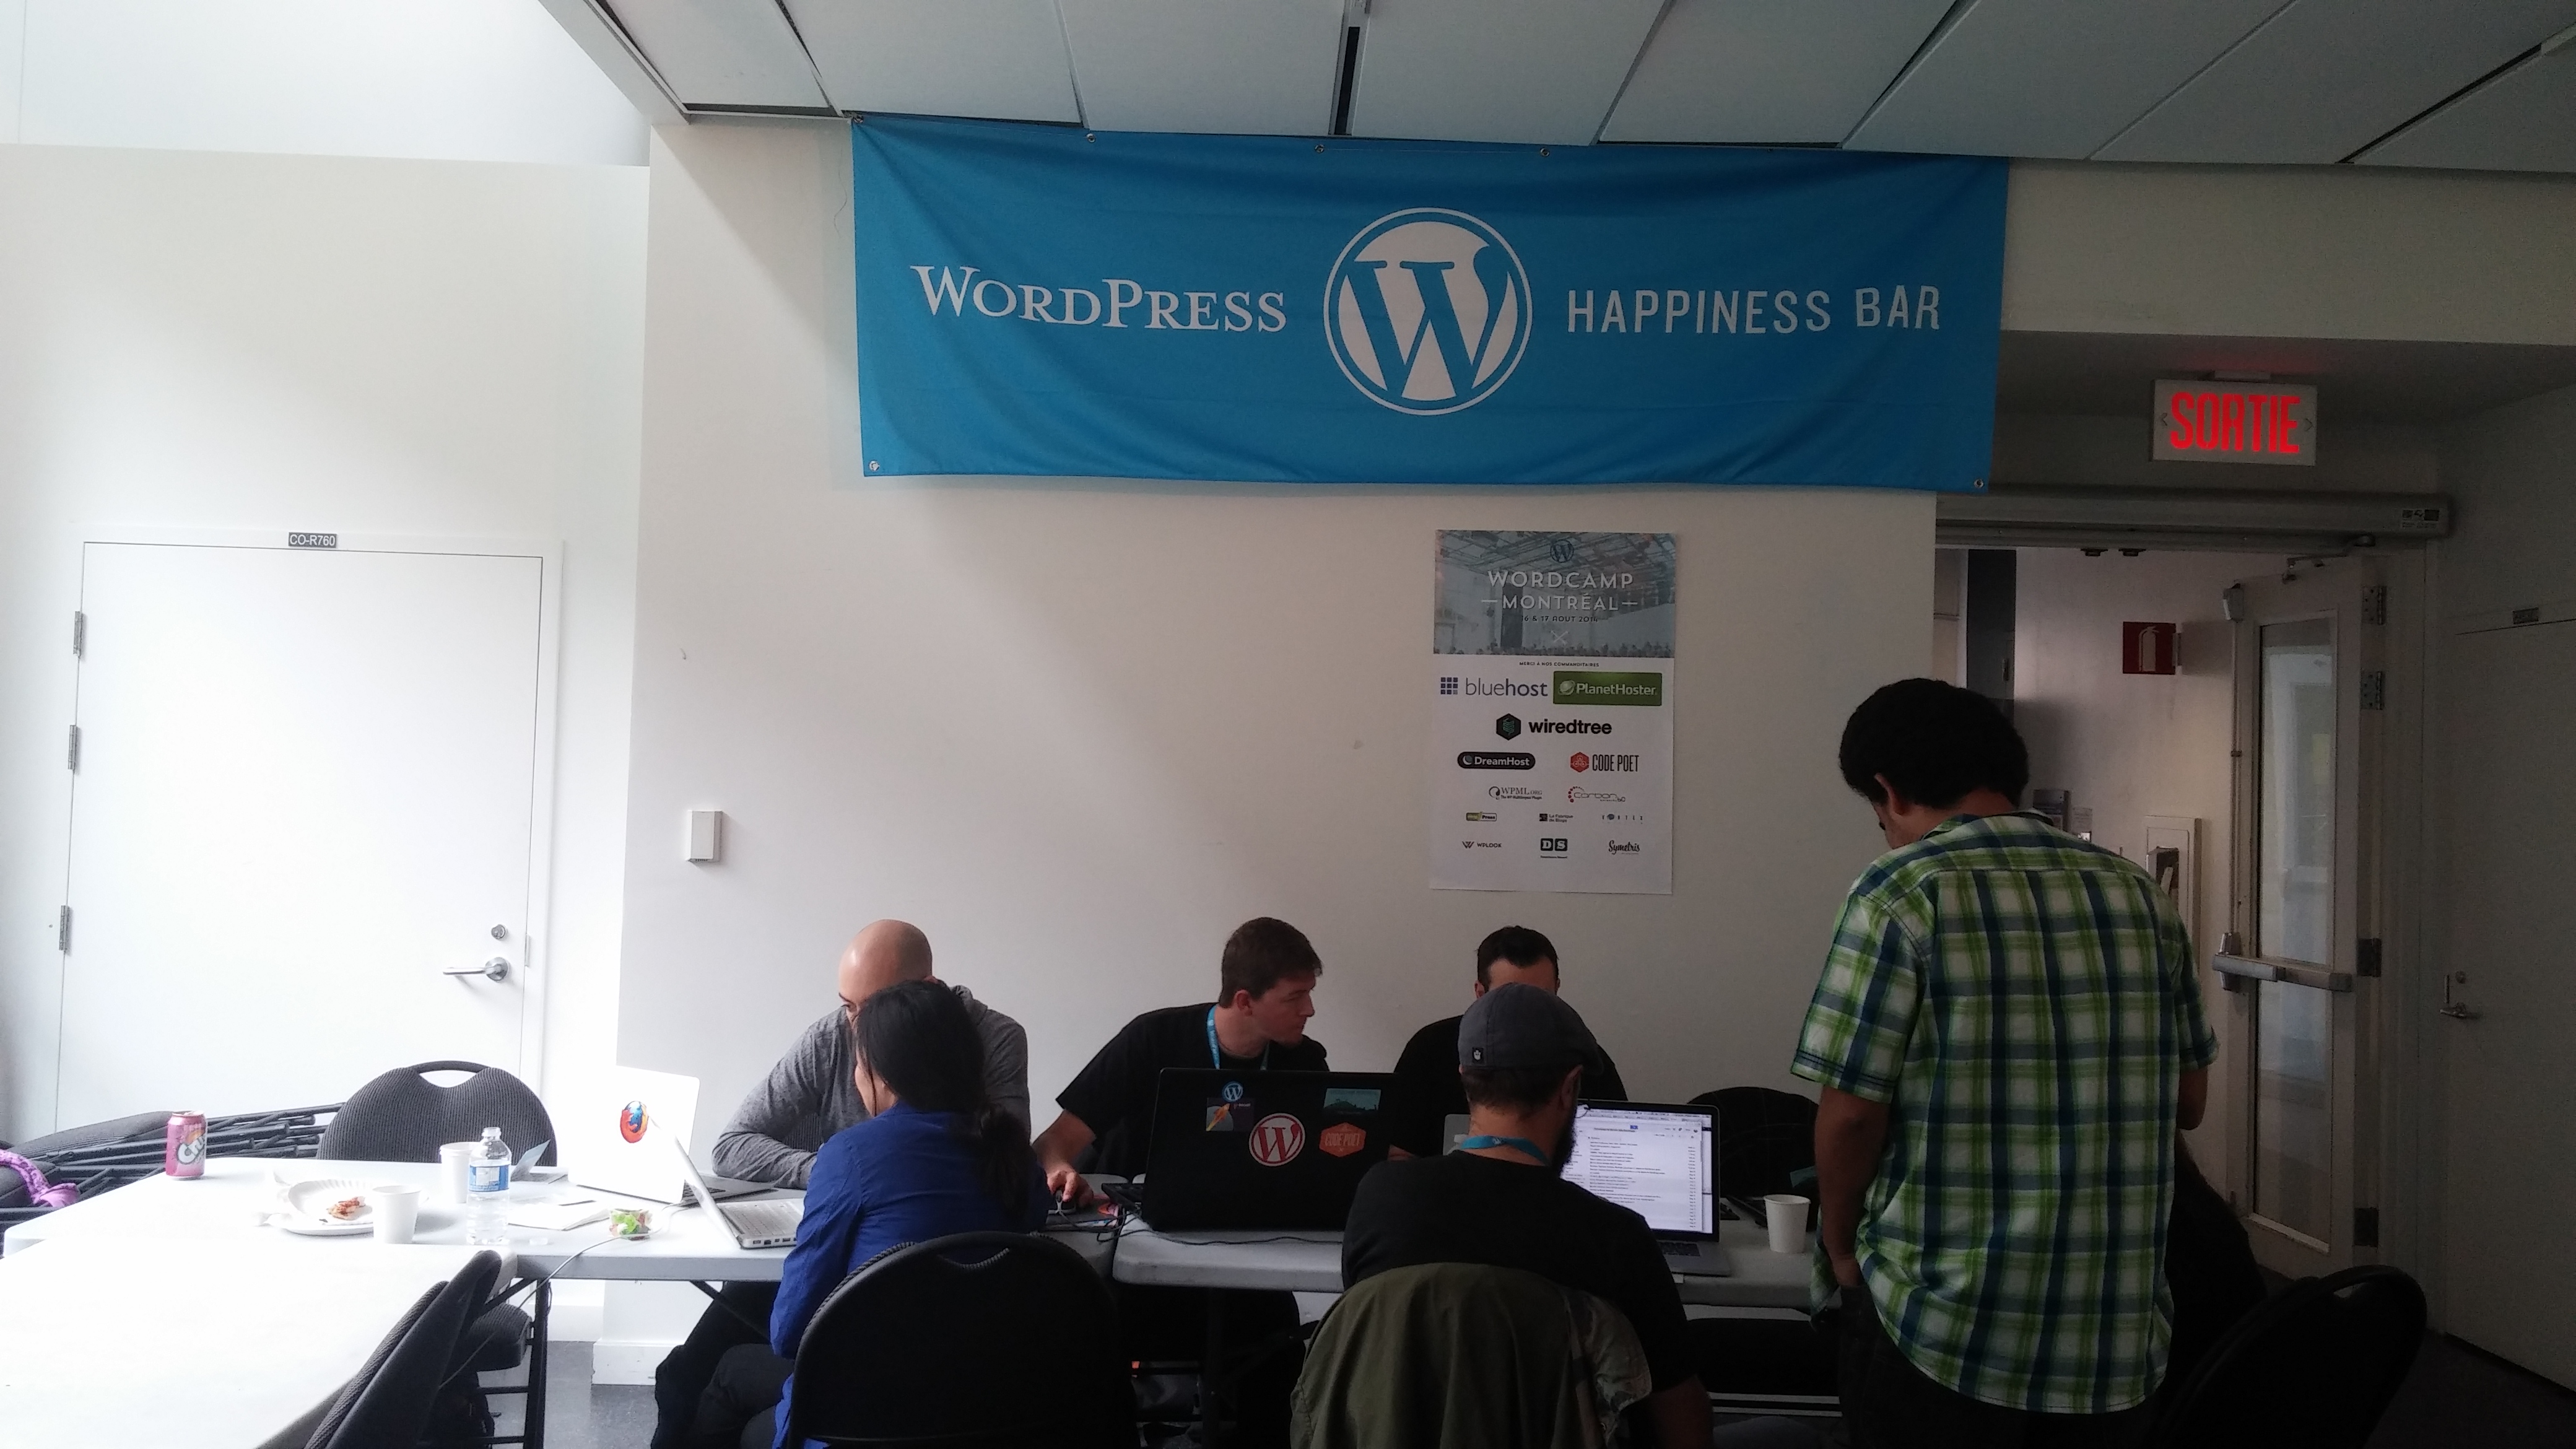 Volunteers sitting at a table with laptops assisting WordCamp attendees